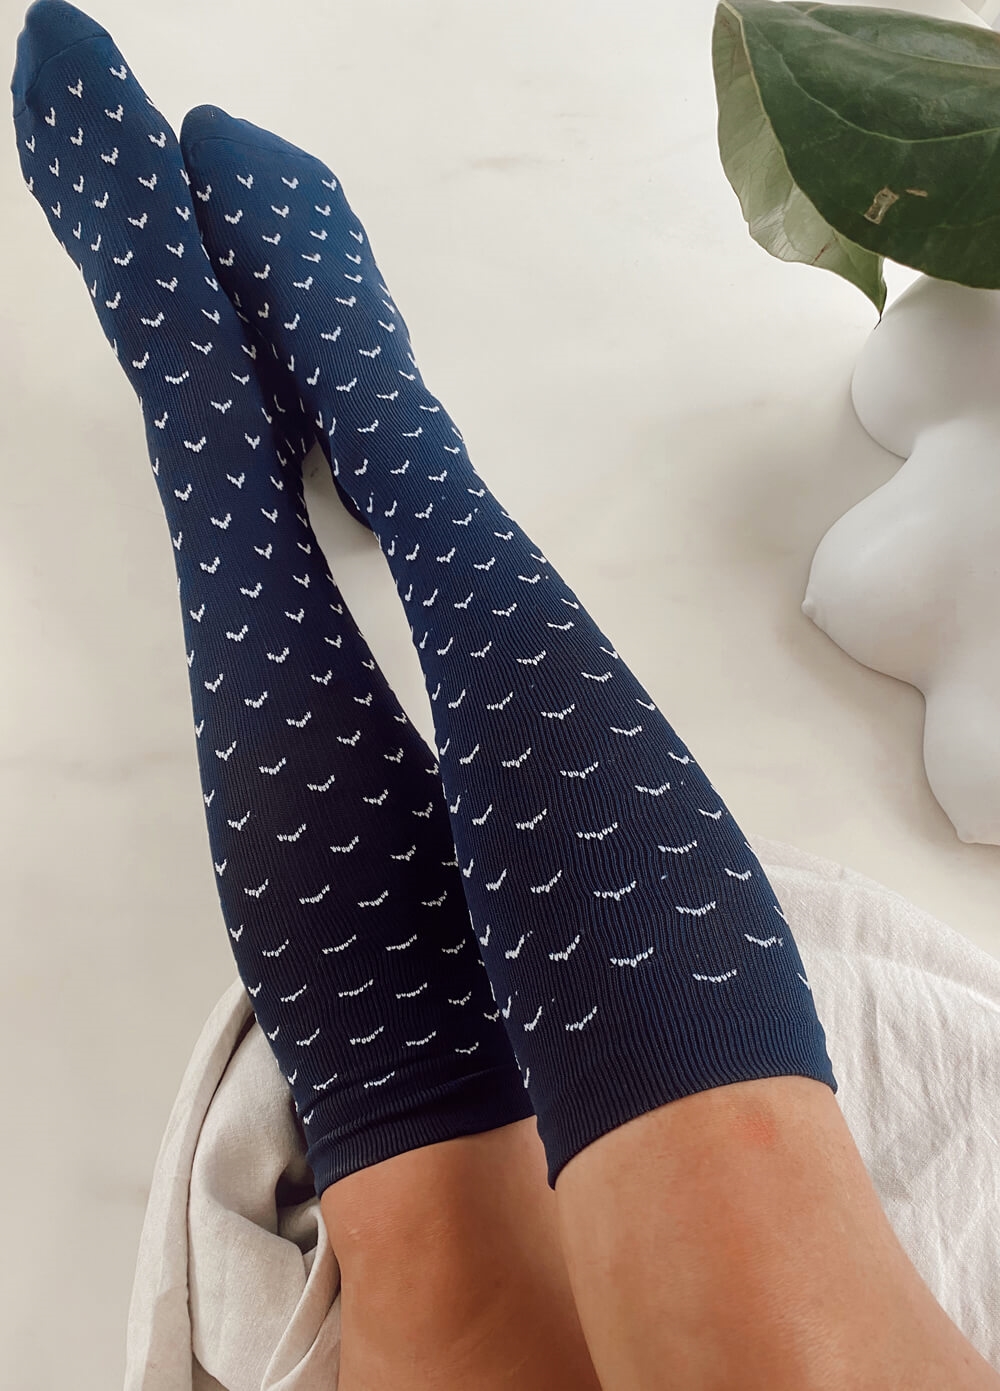 Mama Sox - Excite Maternity Compression Socks in Navy Arrow